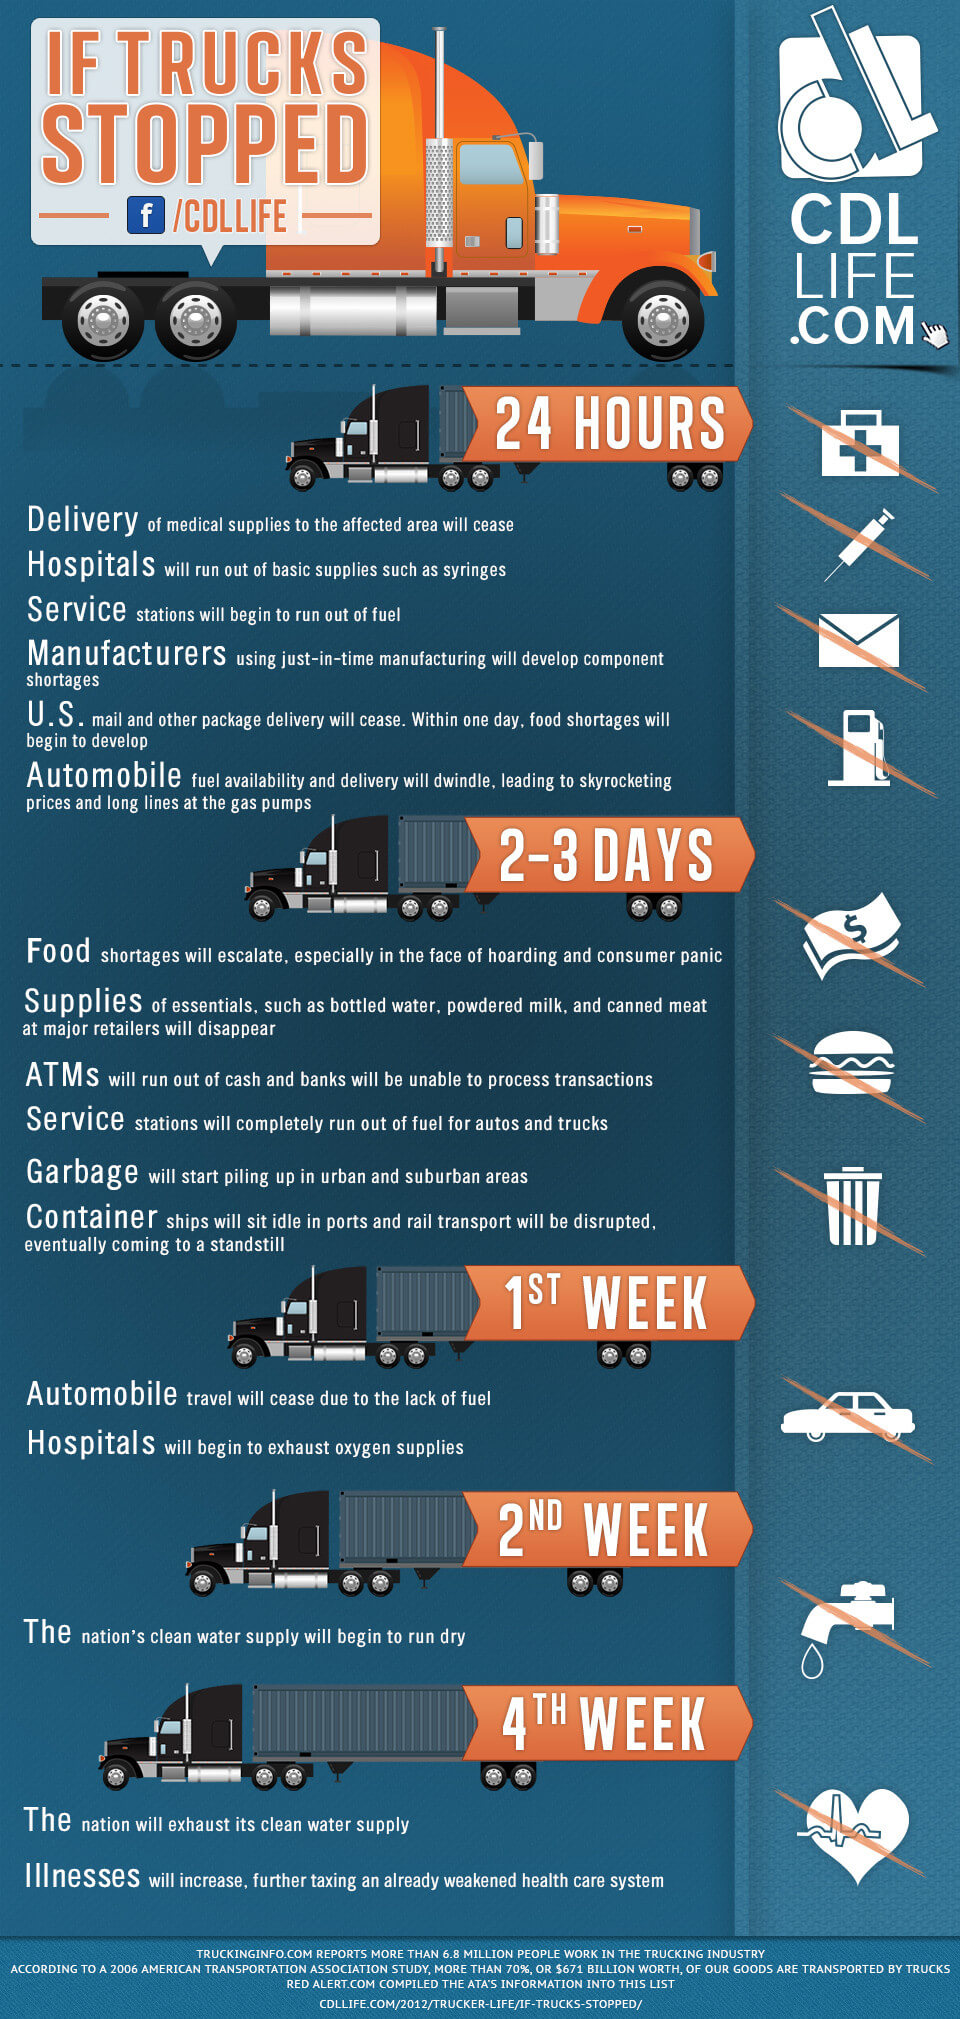 Daily Infographic: Truck driver essentials: Things truckers describe as  'must-haves' - FreightWaves